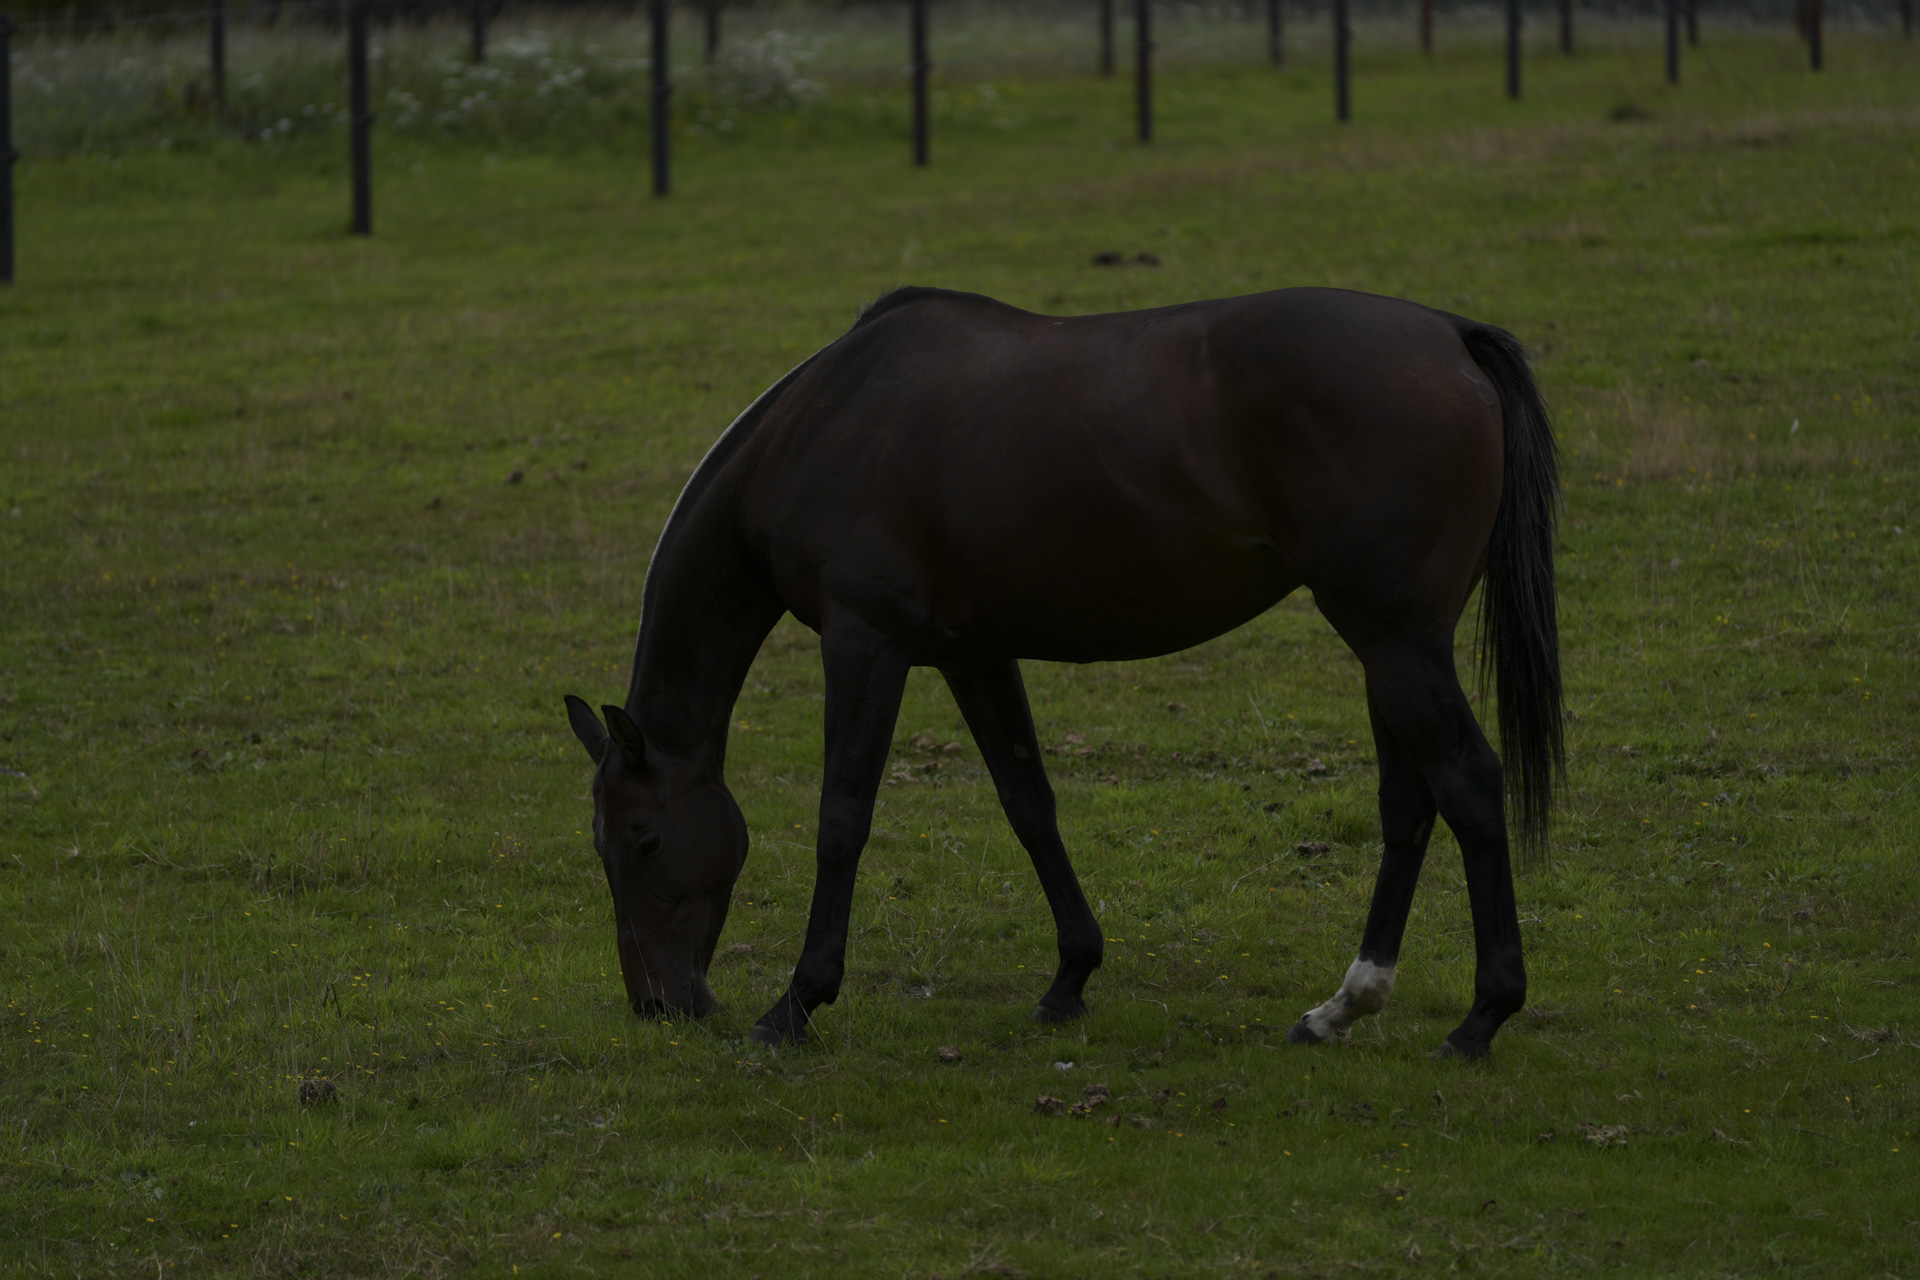 Horse in a field in daylight, taken with the Sony FE 70-200mm F4 II lens and A7C R